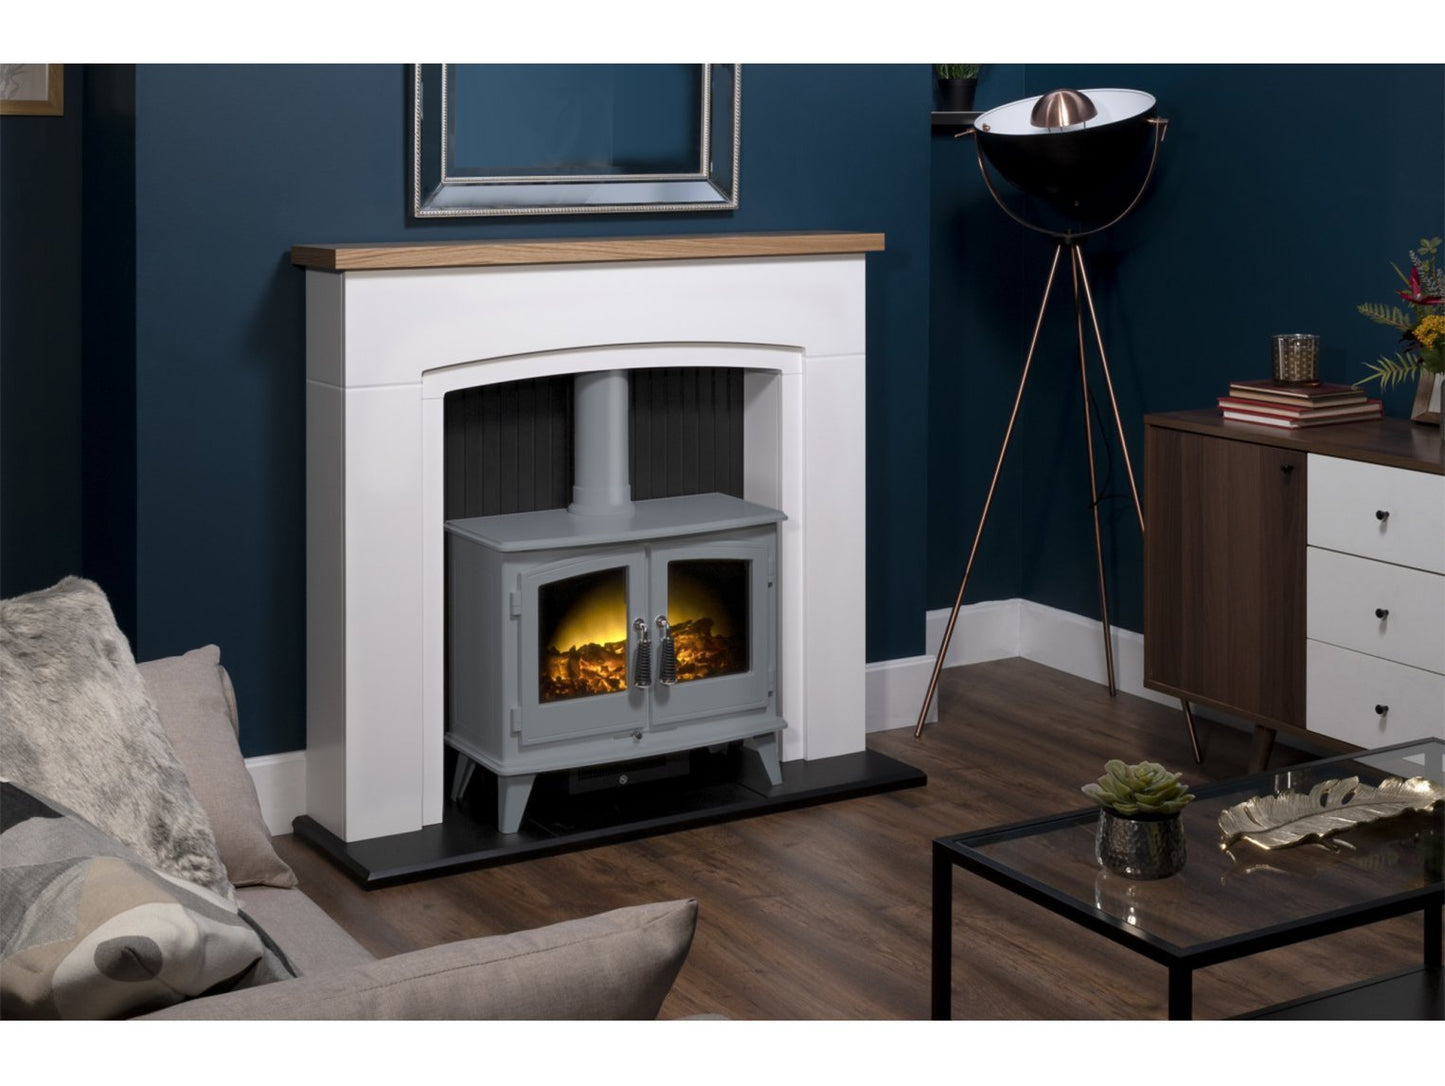 Adam Siena Stove Suite Pure White + Woodhouse Electric Stove Grey, 48"